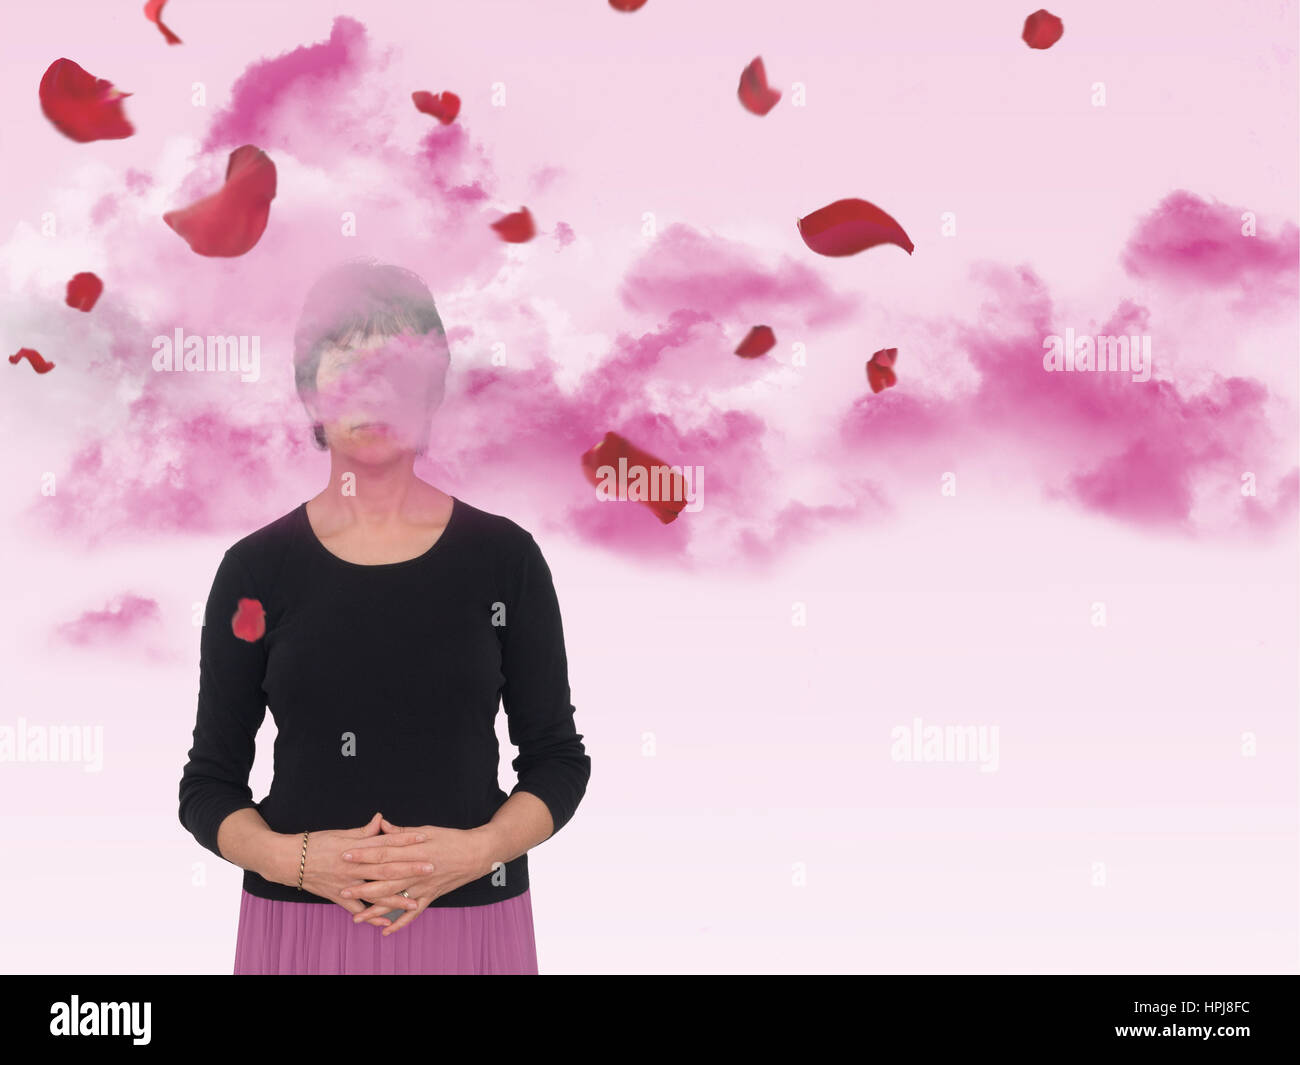 Woman enjoying perfume of roses and petals. Soft pastel shades, pink and red. Well-being, life concept. Stock Photo